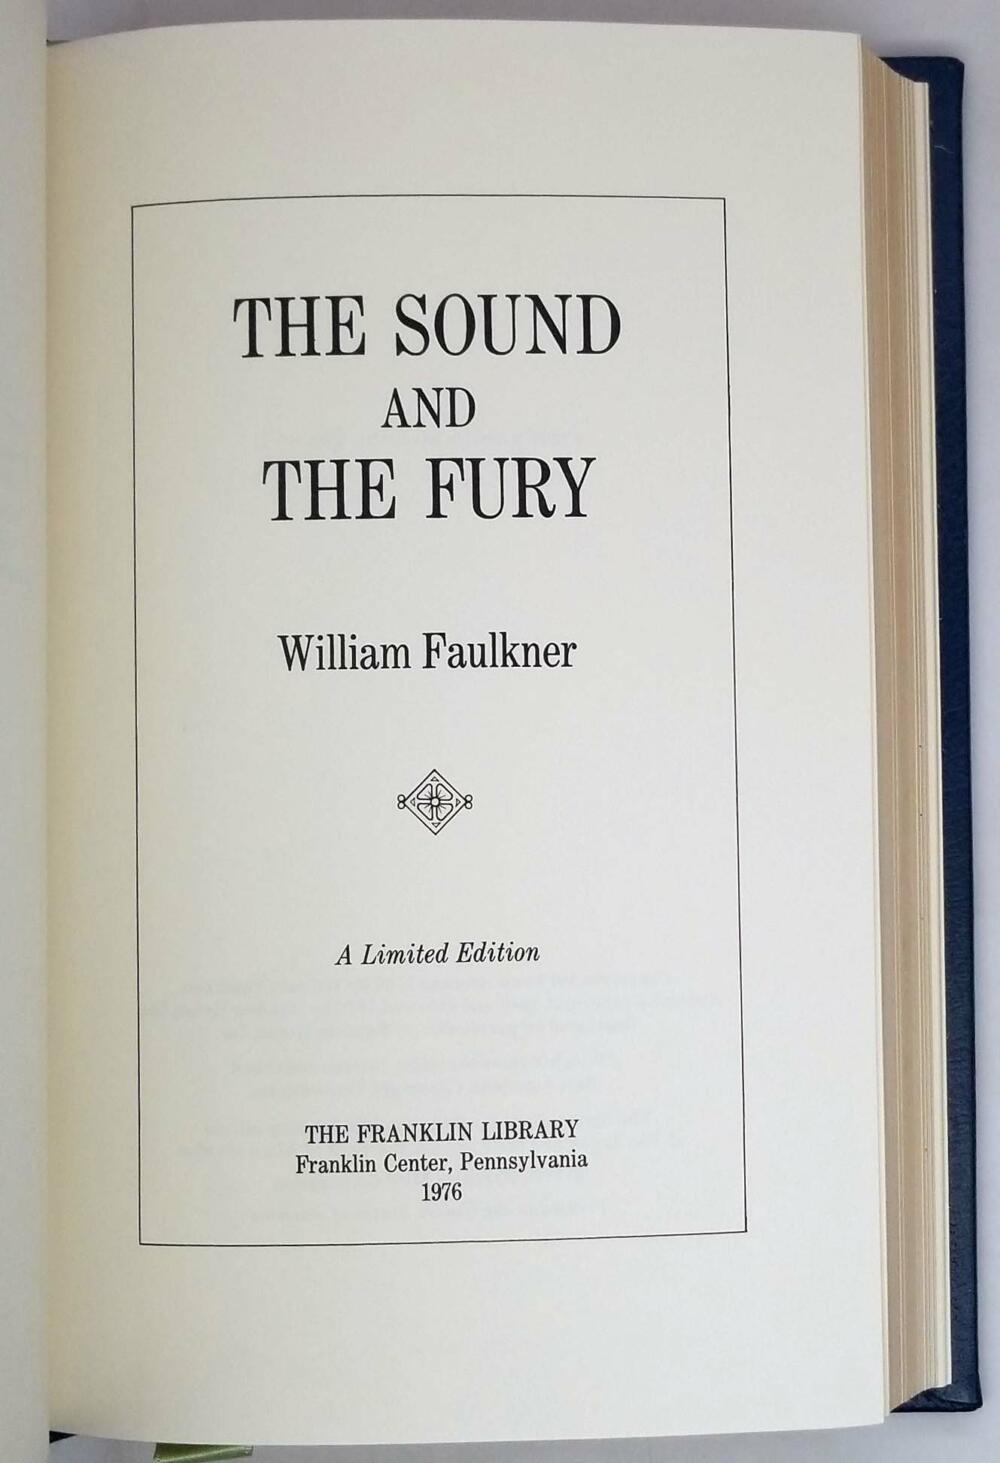 The Sound and the Fury - William Faulkner 1976 | Franklin Library